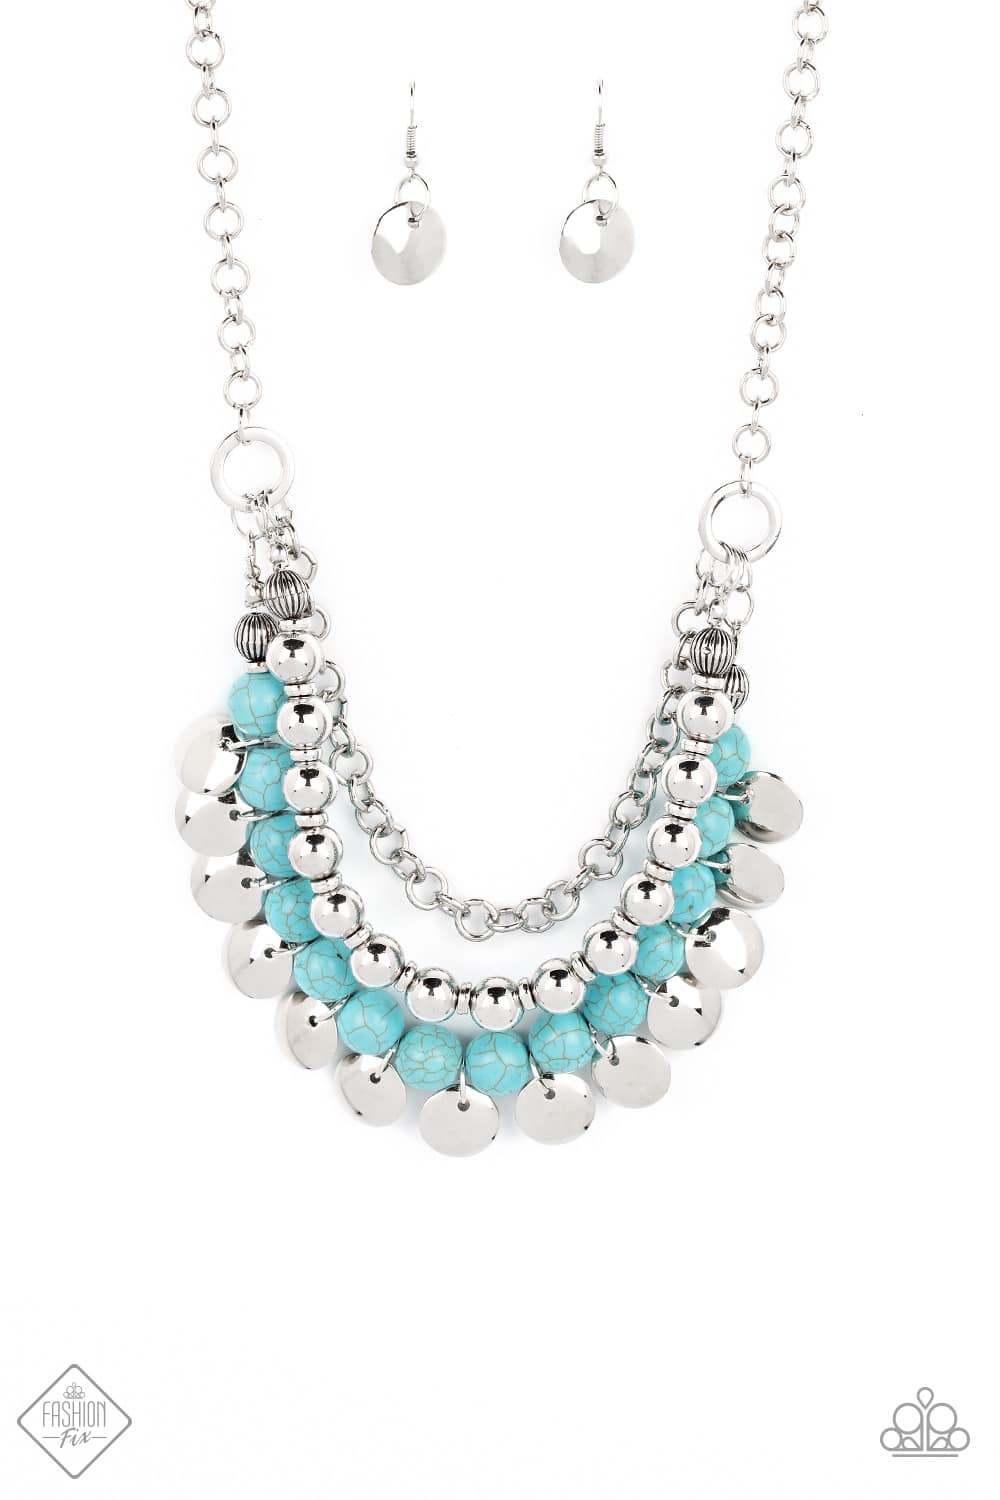 Leave Her Wild - Blue Turquoise Stone Silver Disc Layered Necklace - Paparazzi Fashion Fix September 2022